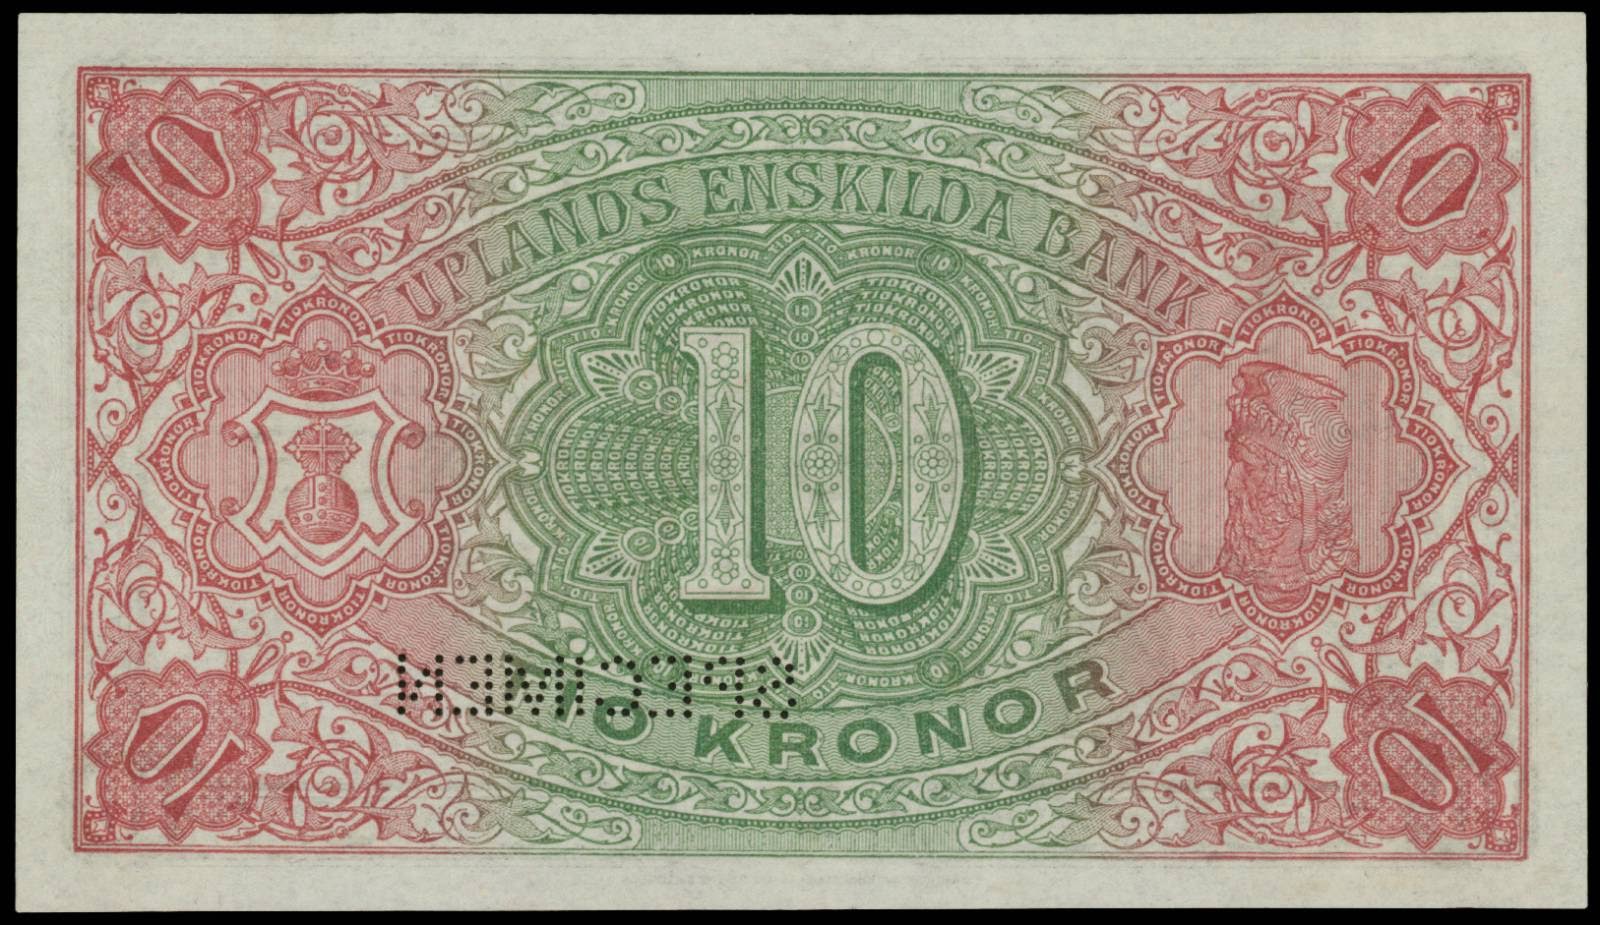 T me blank banknotes